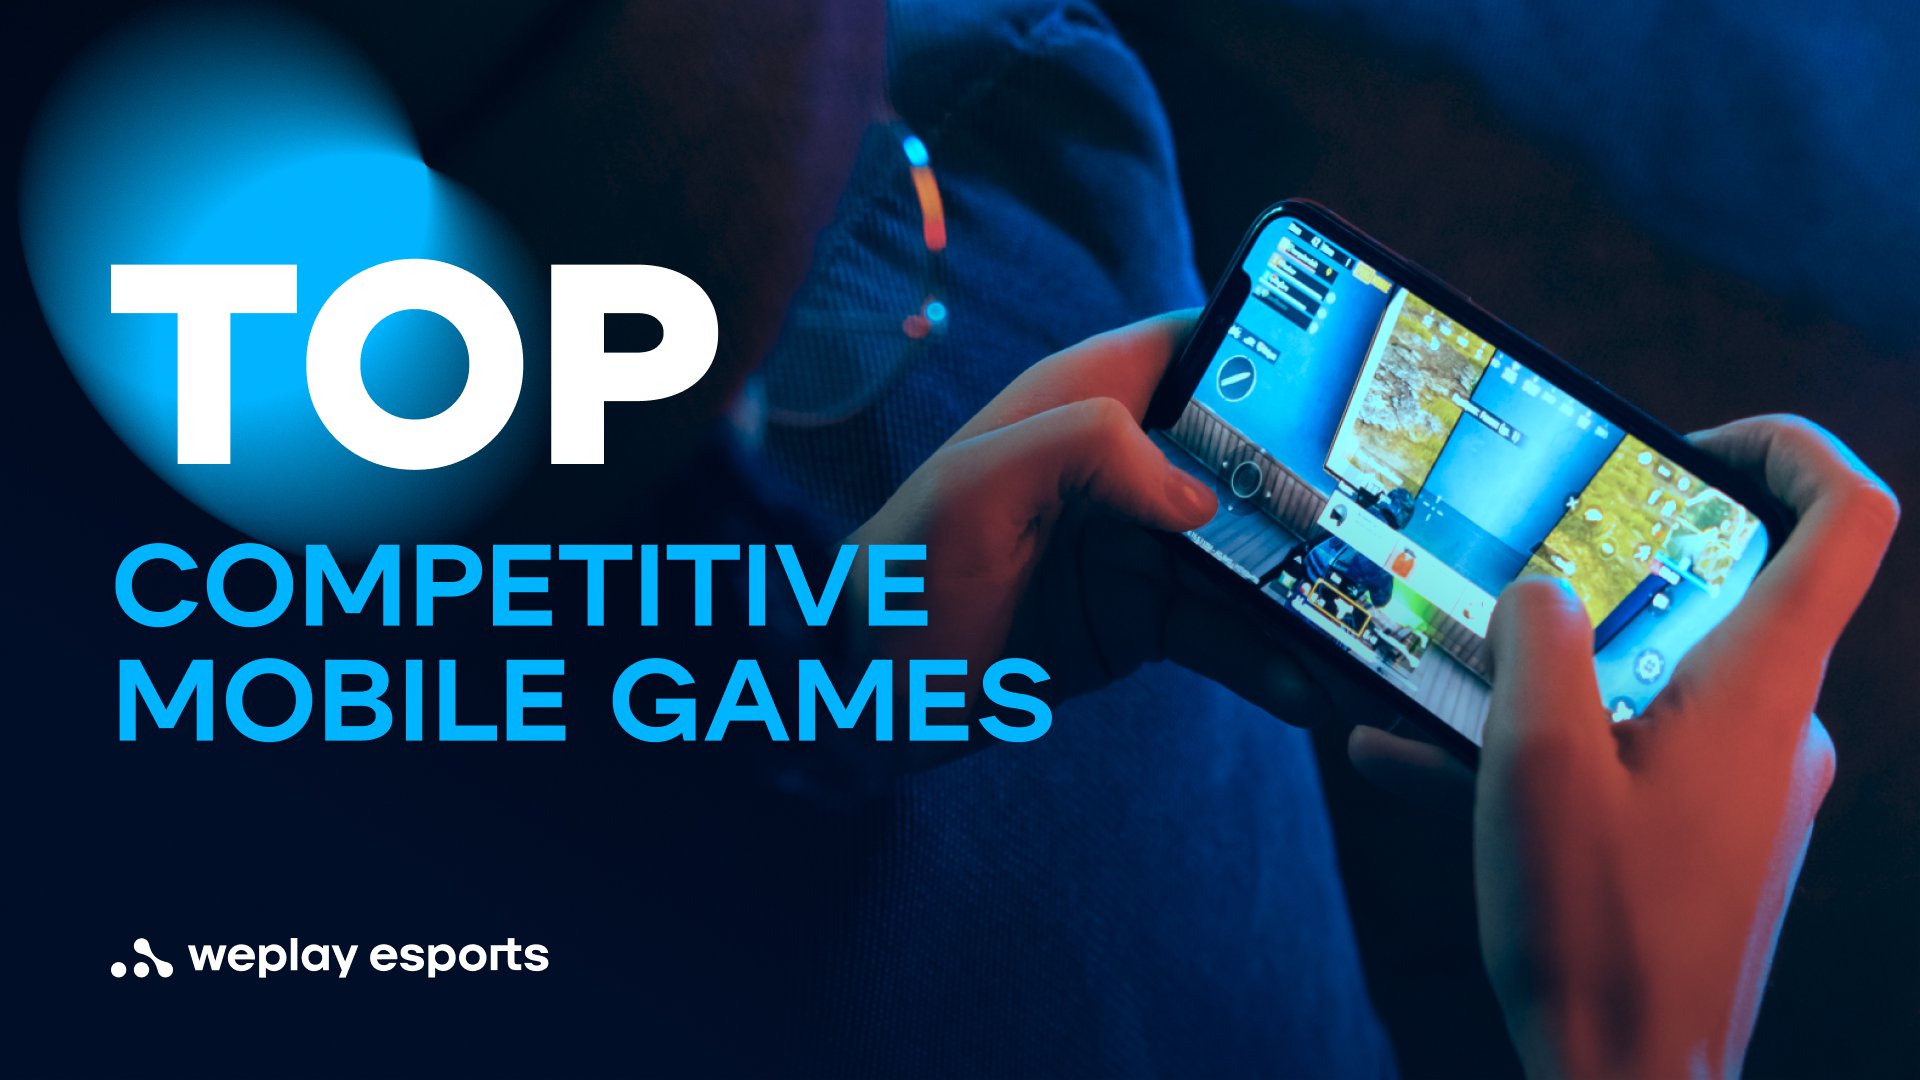 Top competitive mobile games. Credit: WePlay Holding